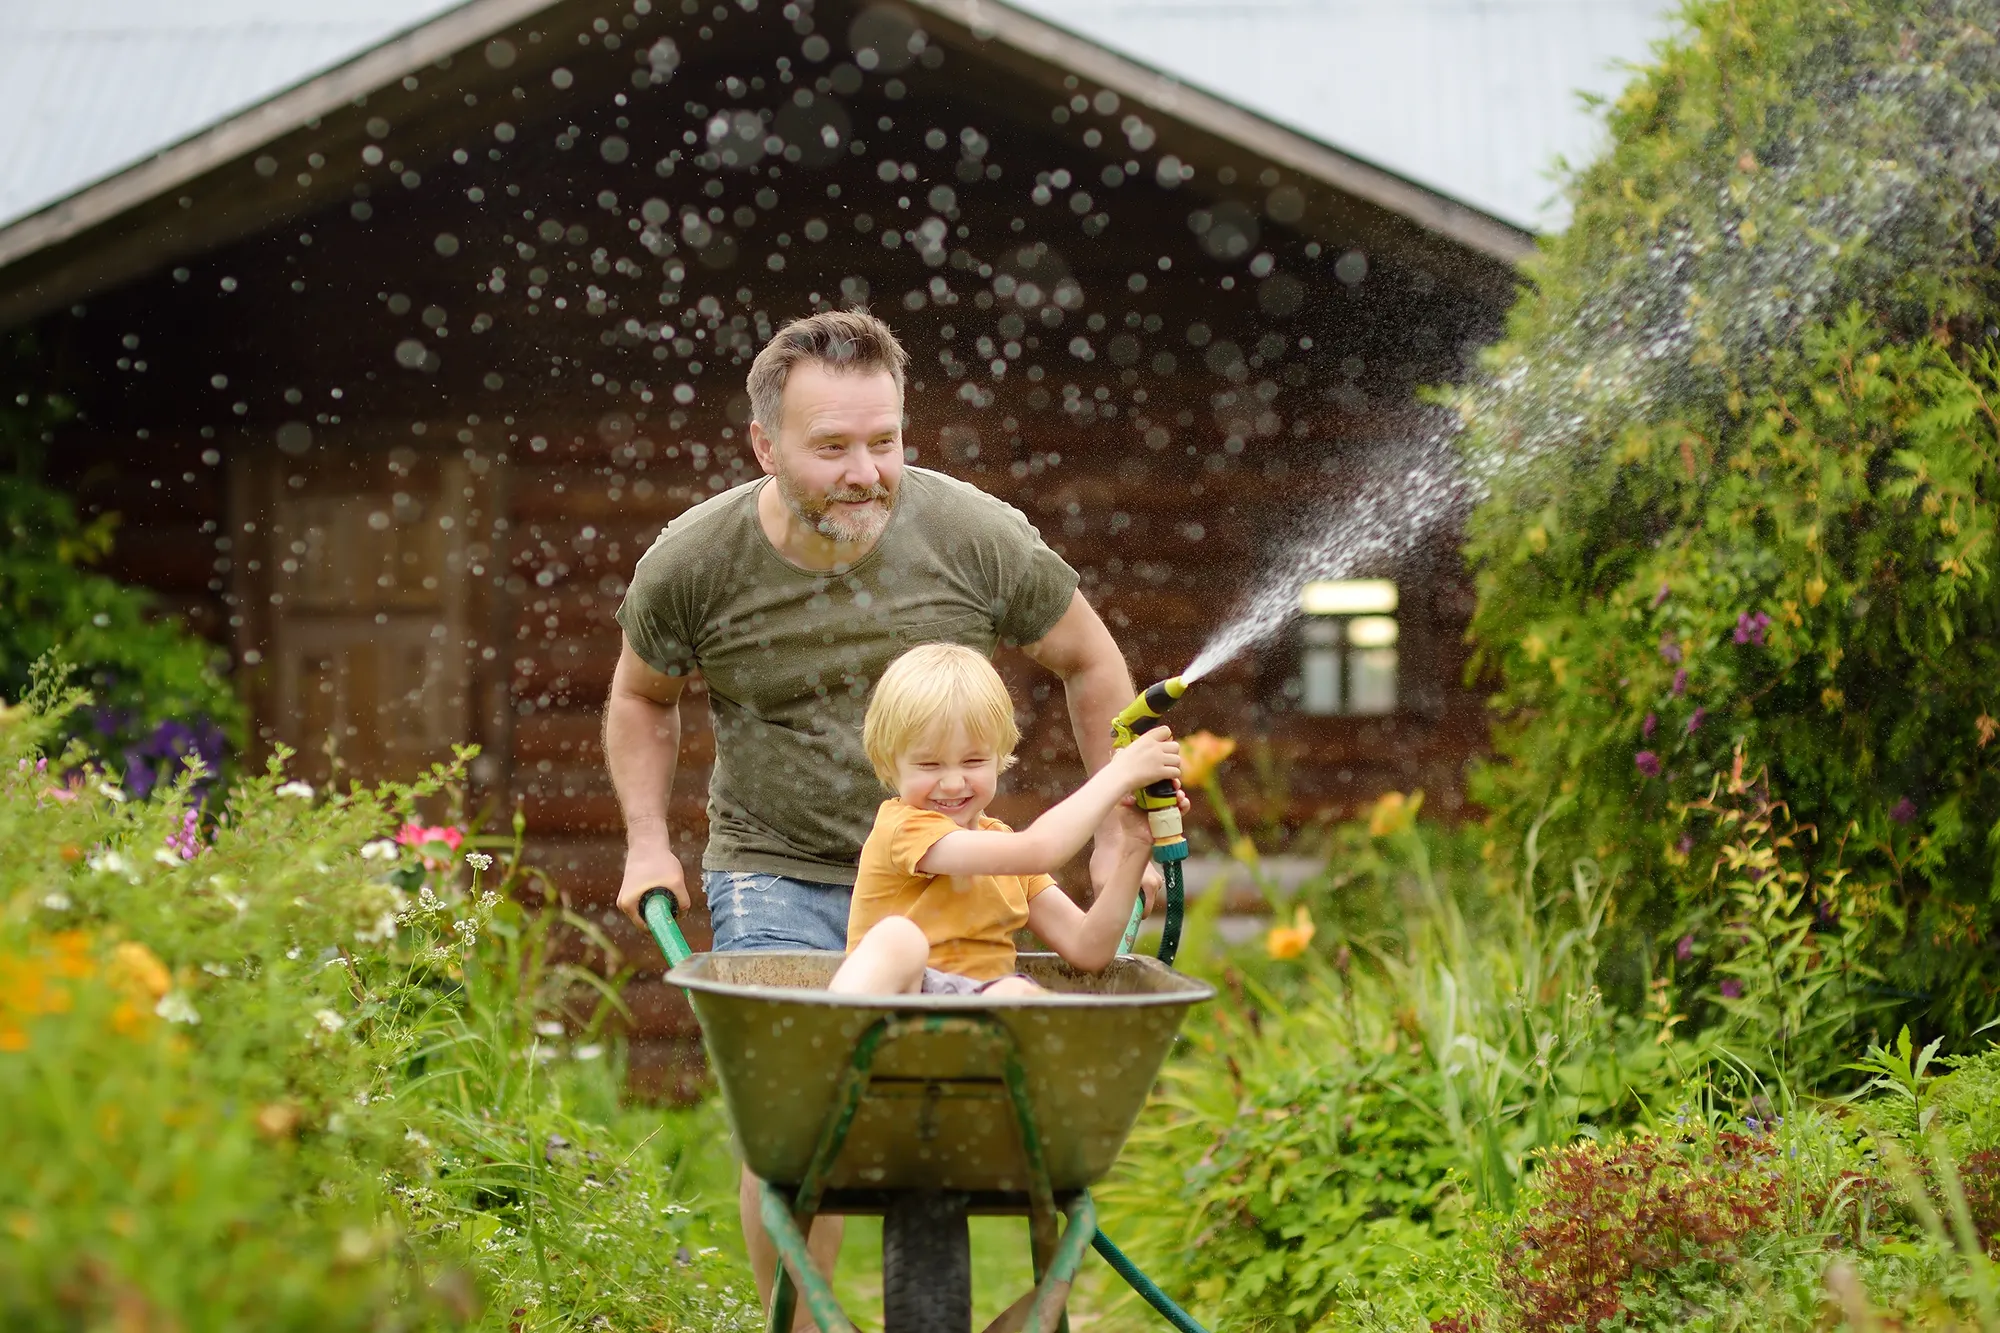 Happy little boy having fun in a wheelbarrow pushing by dad in domestic garden on warm sunny day. Child watering plants from a hose. Active outdoors games for family with kids in summer